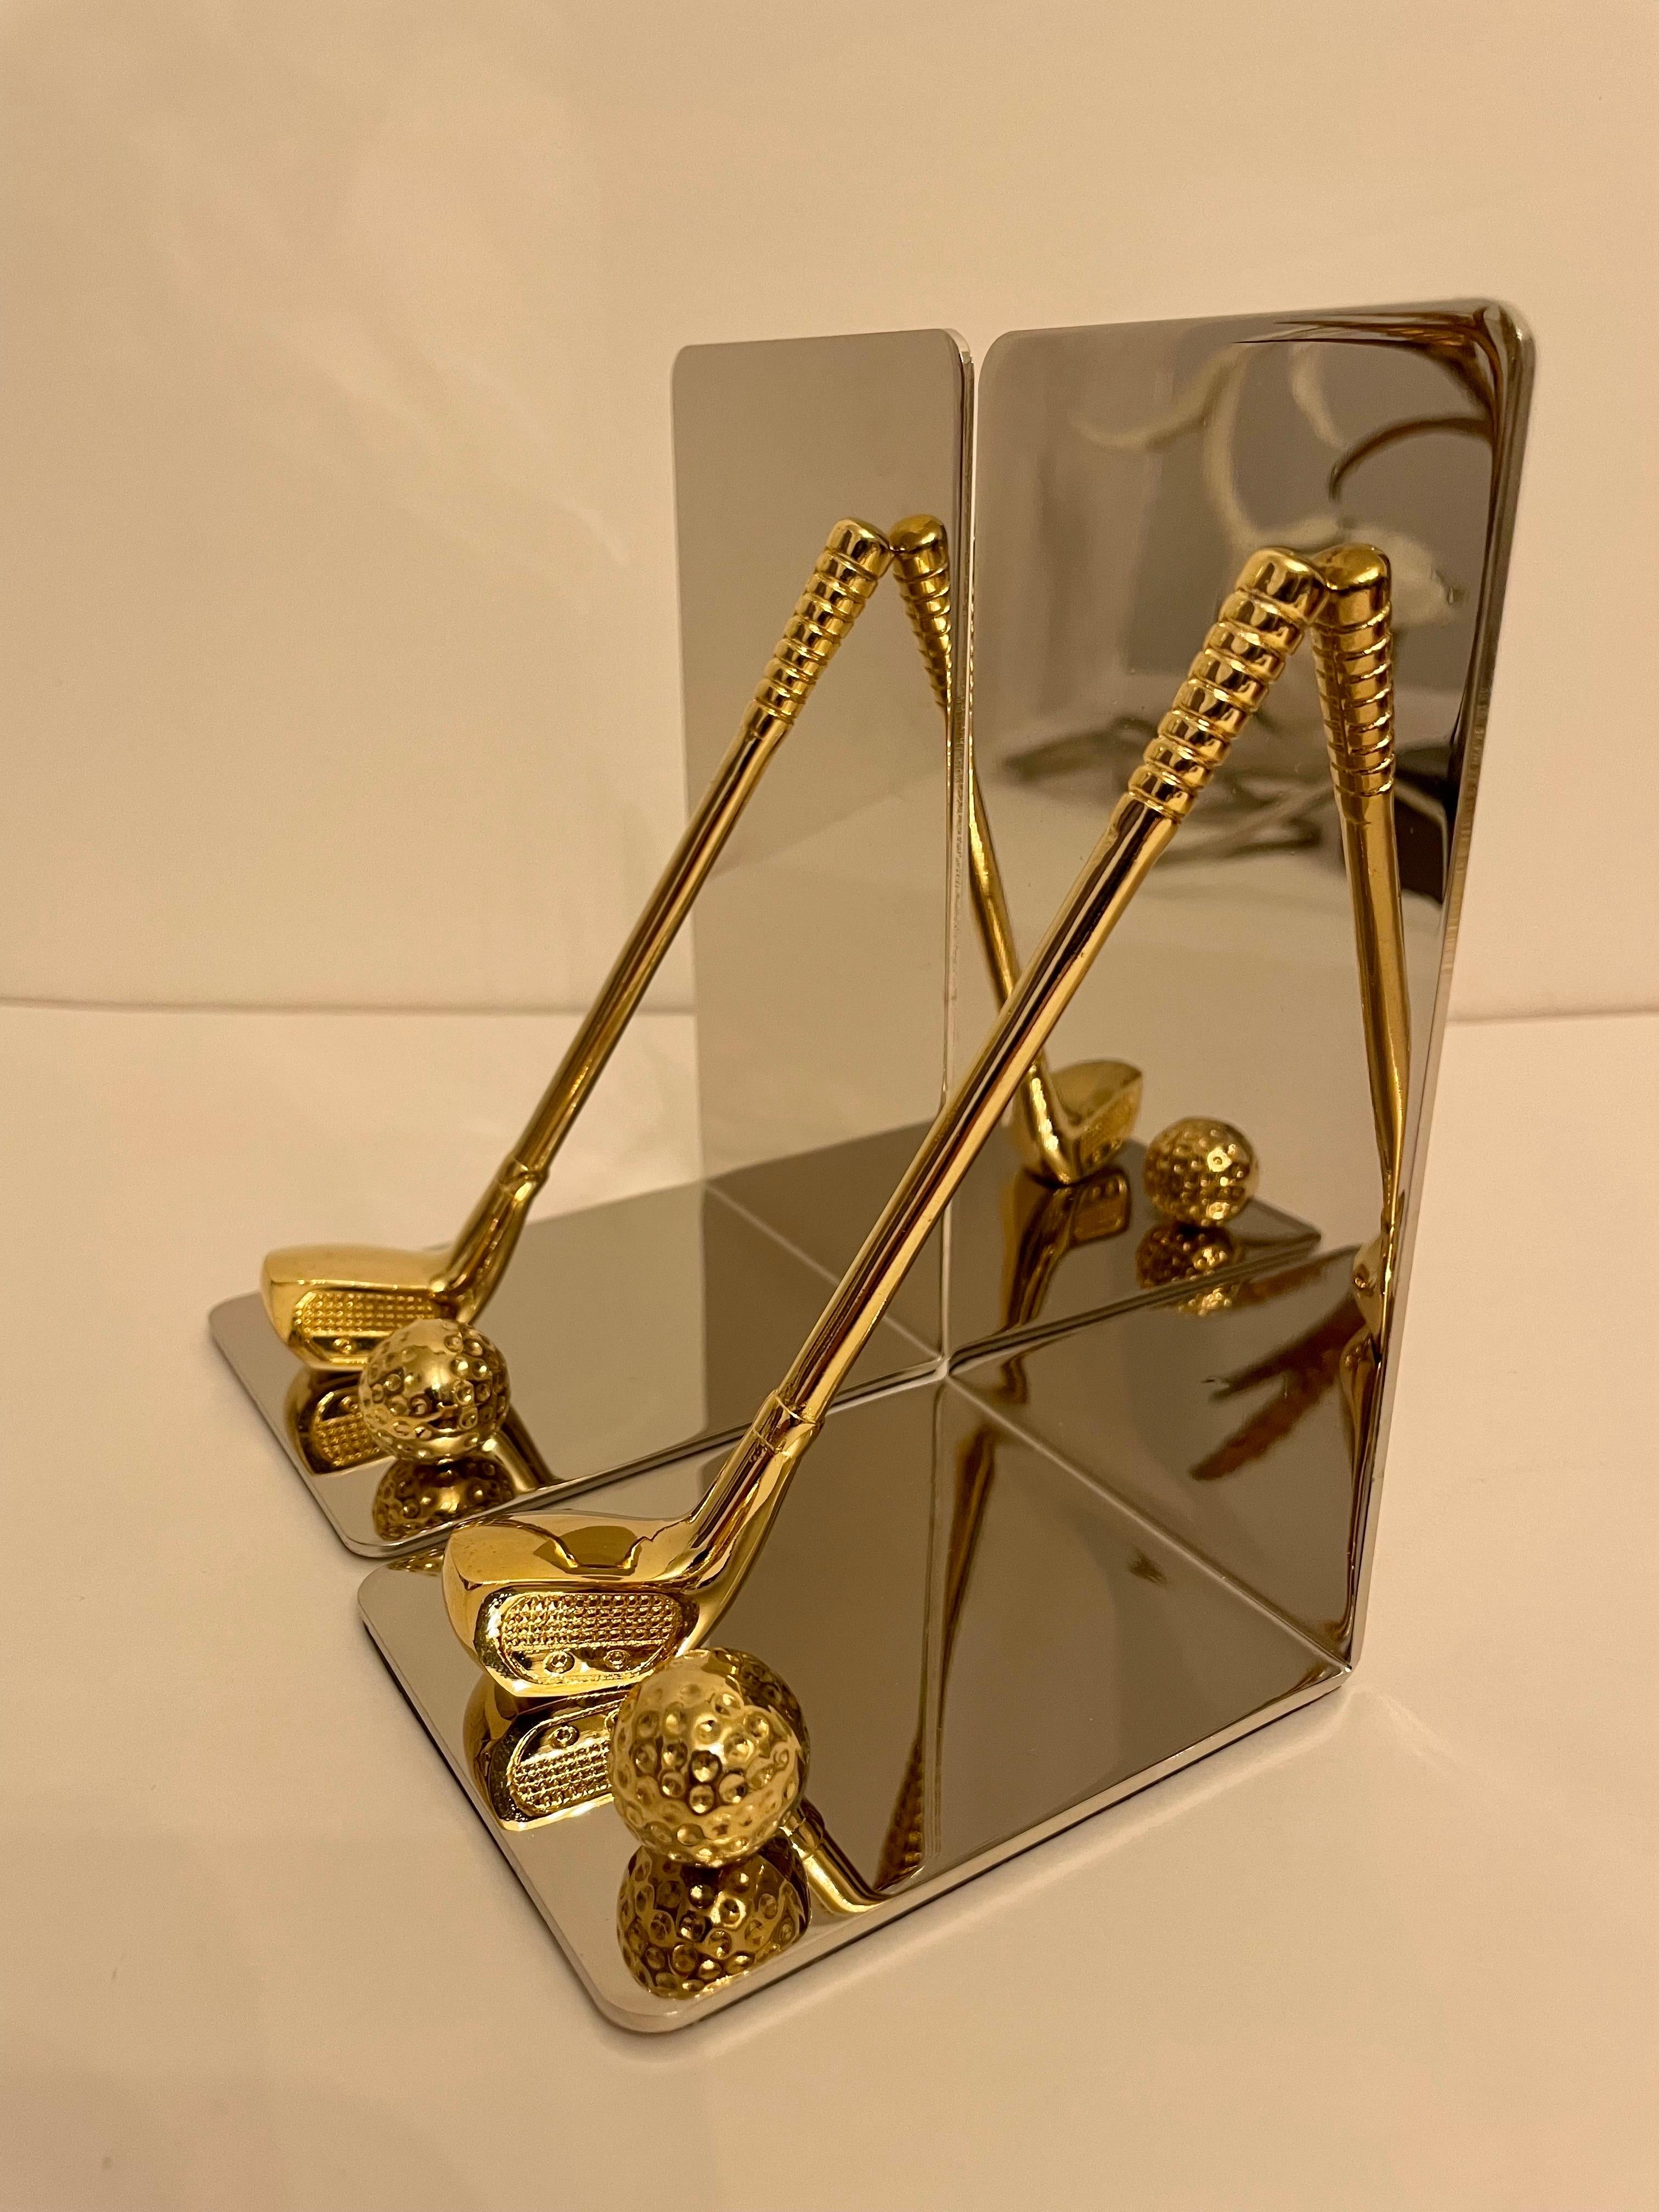 Set of brass and chrome golf bookends featuring brass club and ball with nice detail. Thin foam on bottom to prevent scratching. Great for the golfer or man cave or she shed. Great overall condition, never used.